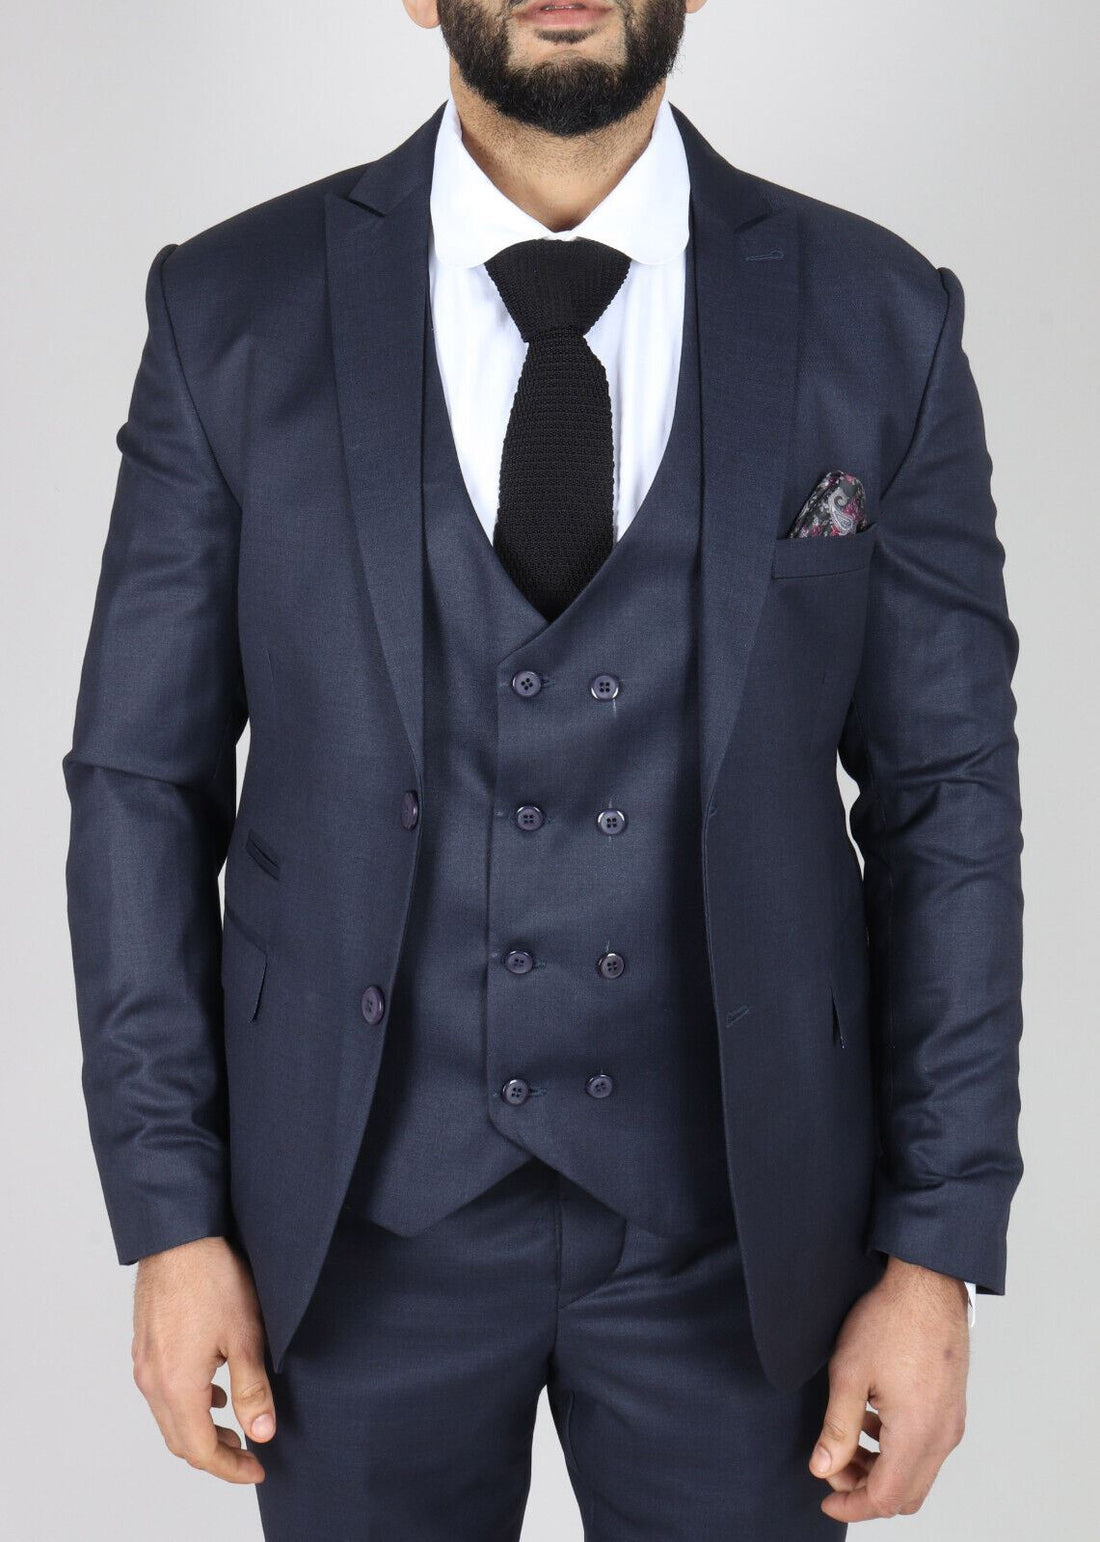 Mens IM1 Double Brusted Plain Navy 3 Piece Suit - Upperclass Fashions 